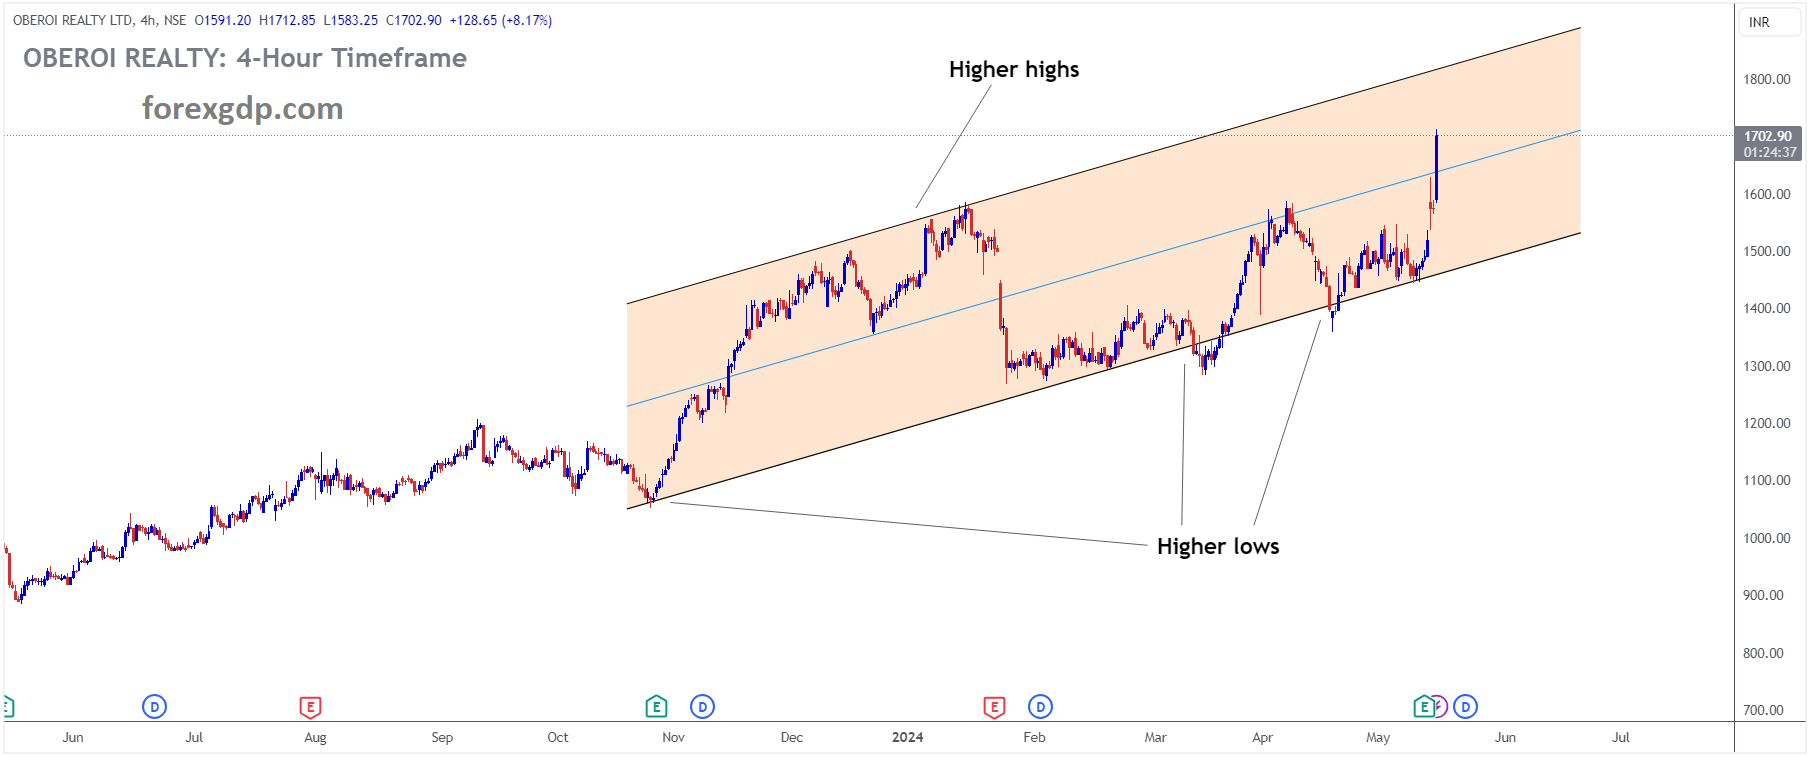 OBEROI REALTY Market price is moving in Ascending channel and market has rebounded from the higher low area of the channel